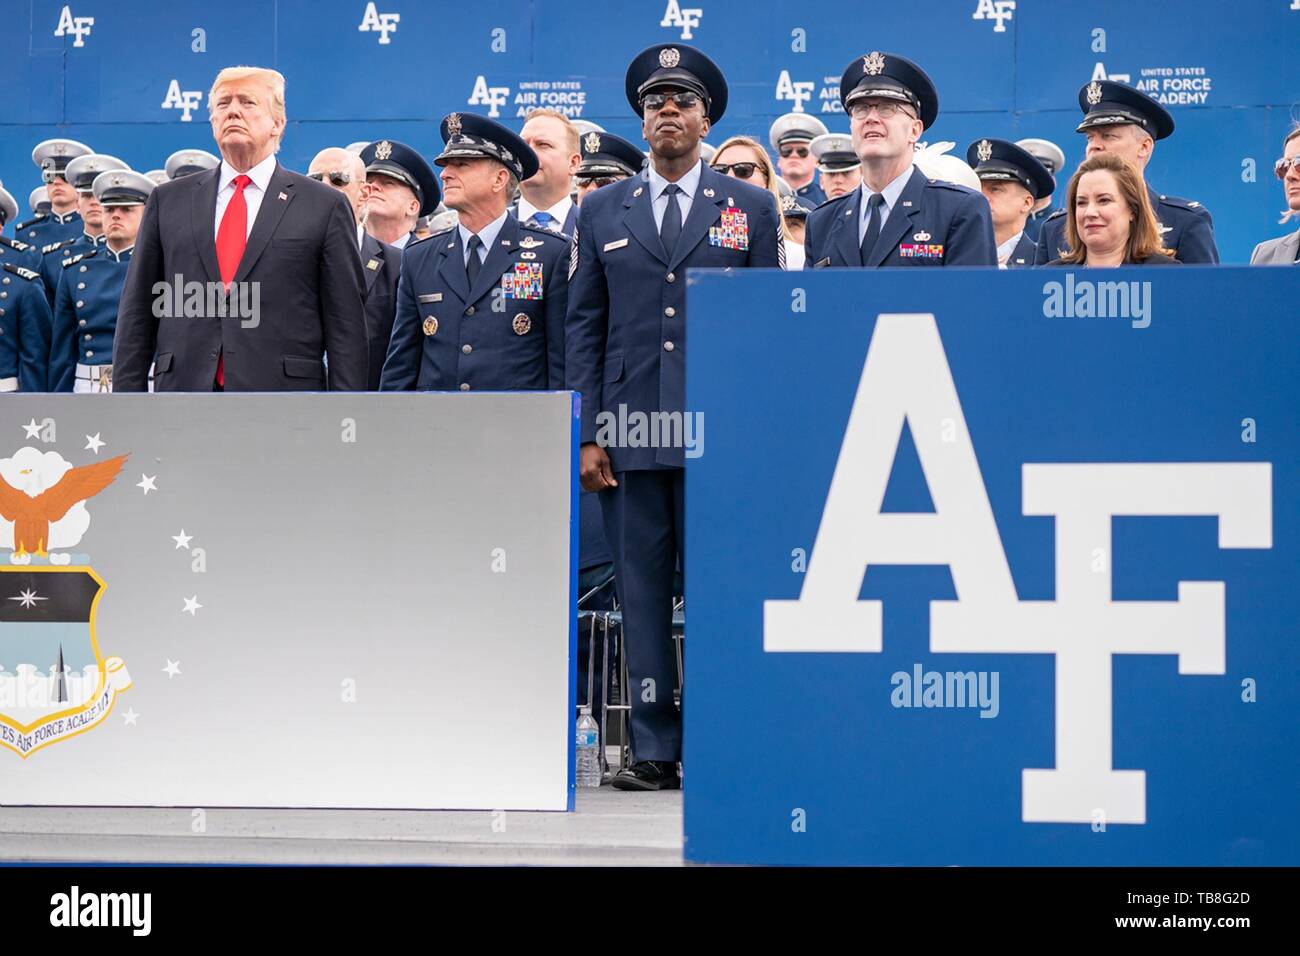 U.S President Donald Trump stands with Air Force officers as they watch the Air Force Air Demonstration Squadron Thunderbirds perform a flyby marking the end of the U.S. Air Force Academy Graduation Ceremony at the USAF Academy Falcon Stadium May 30, 2019 in Colorado Springs, Colorado. Credit: Planetpix/Alamy Live News Stock Photo